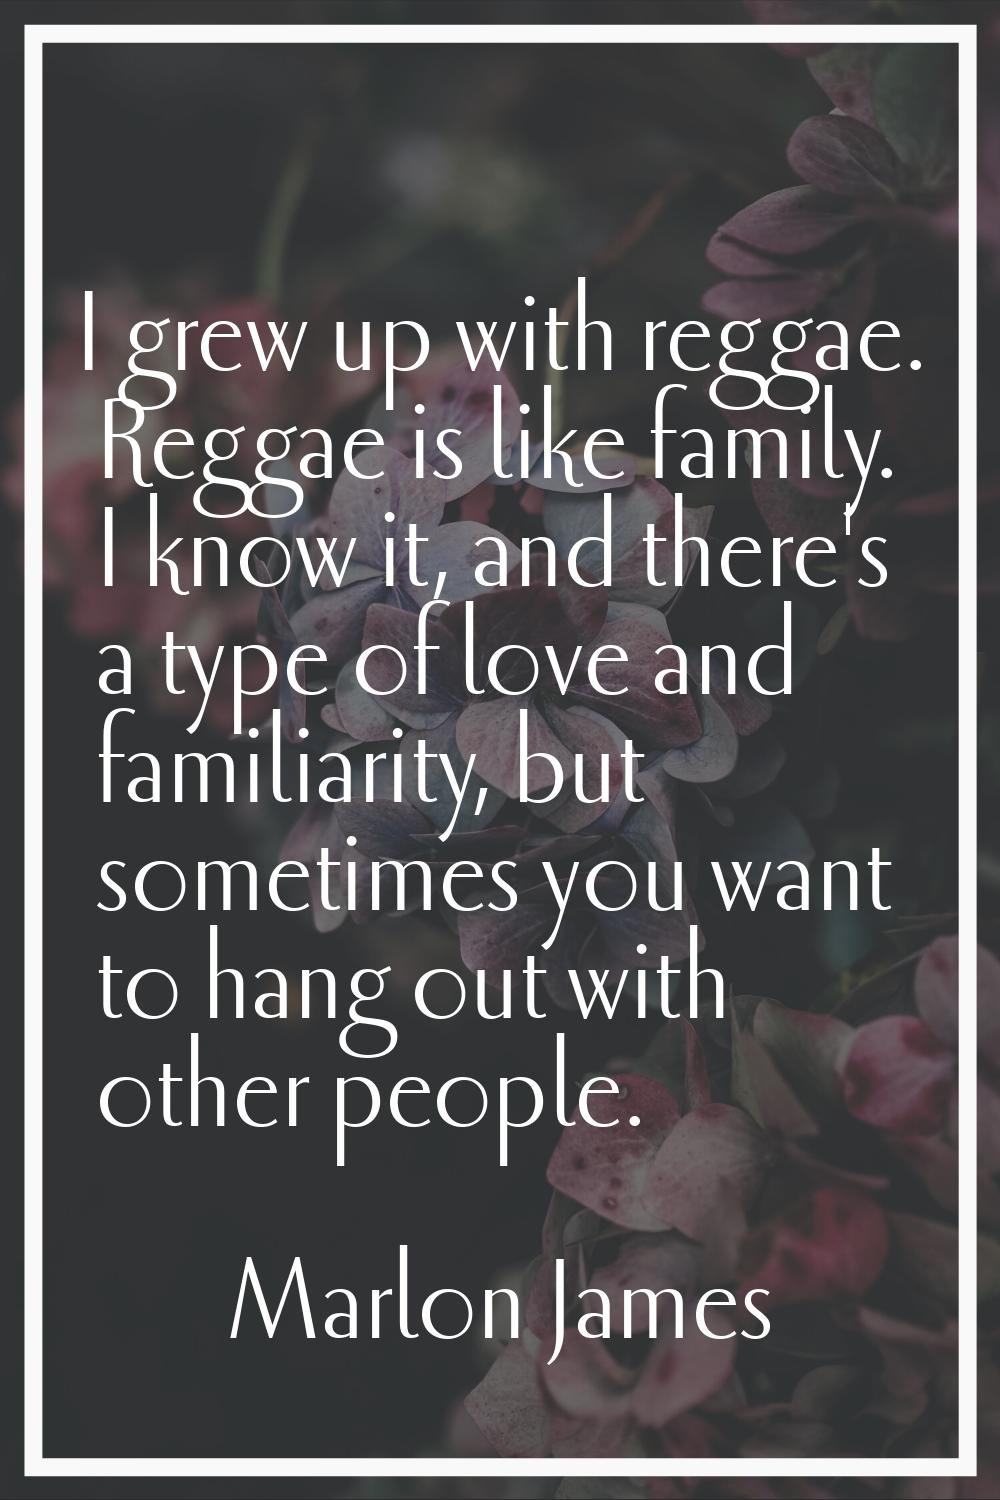 I grew up with reggae. Reggae is like family. I know it, and there's a type of love and familiarity